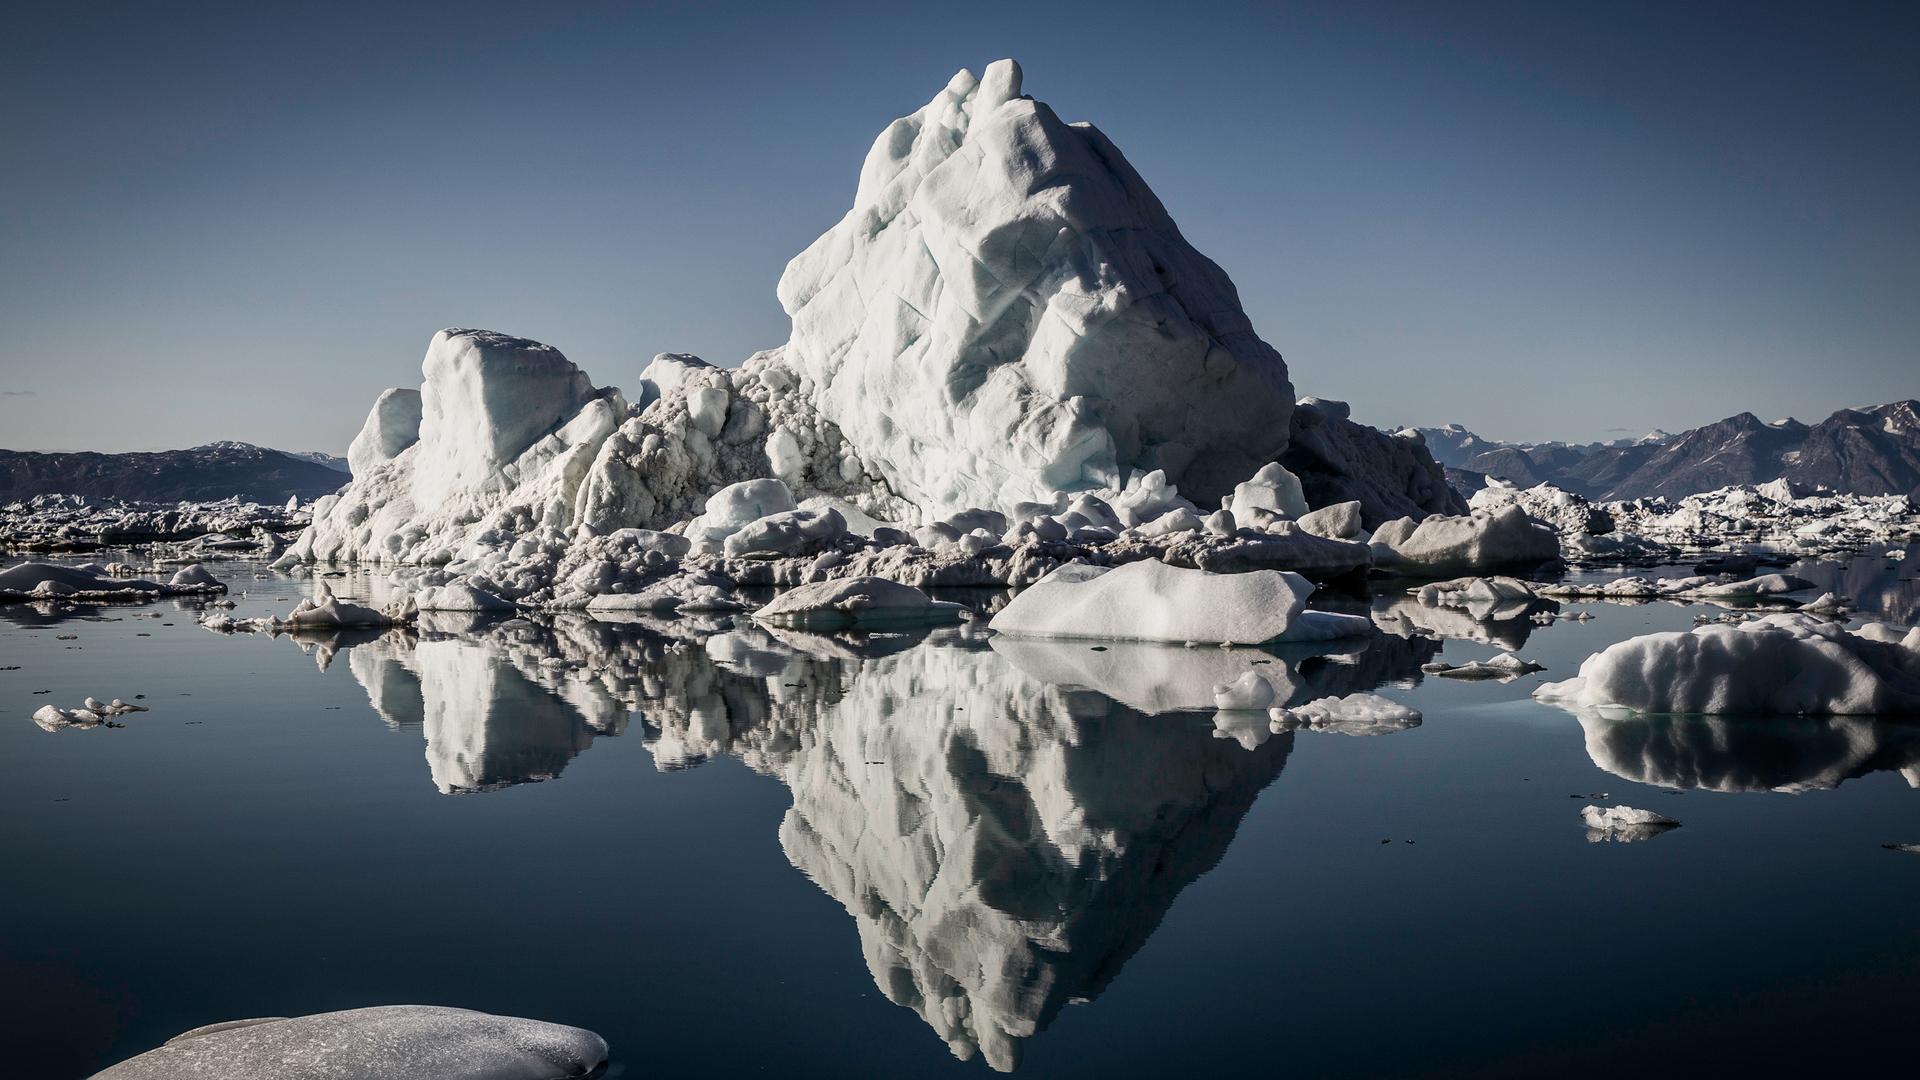 Greenland's Sermilik fjord is choked with huge icebergs from one of the island's biggest glaciers. But climate researchers working in the fjord and on the Helheim glacier are looking for tiny clues in hopes of getting a better handle on how cliamte change